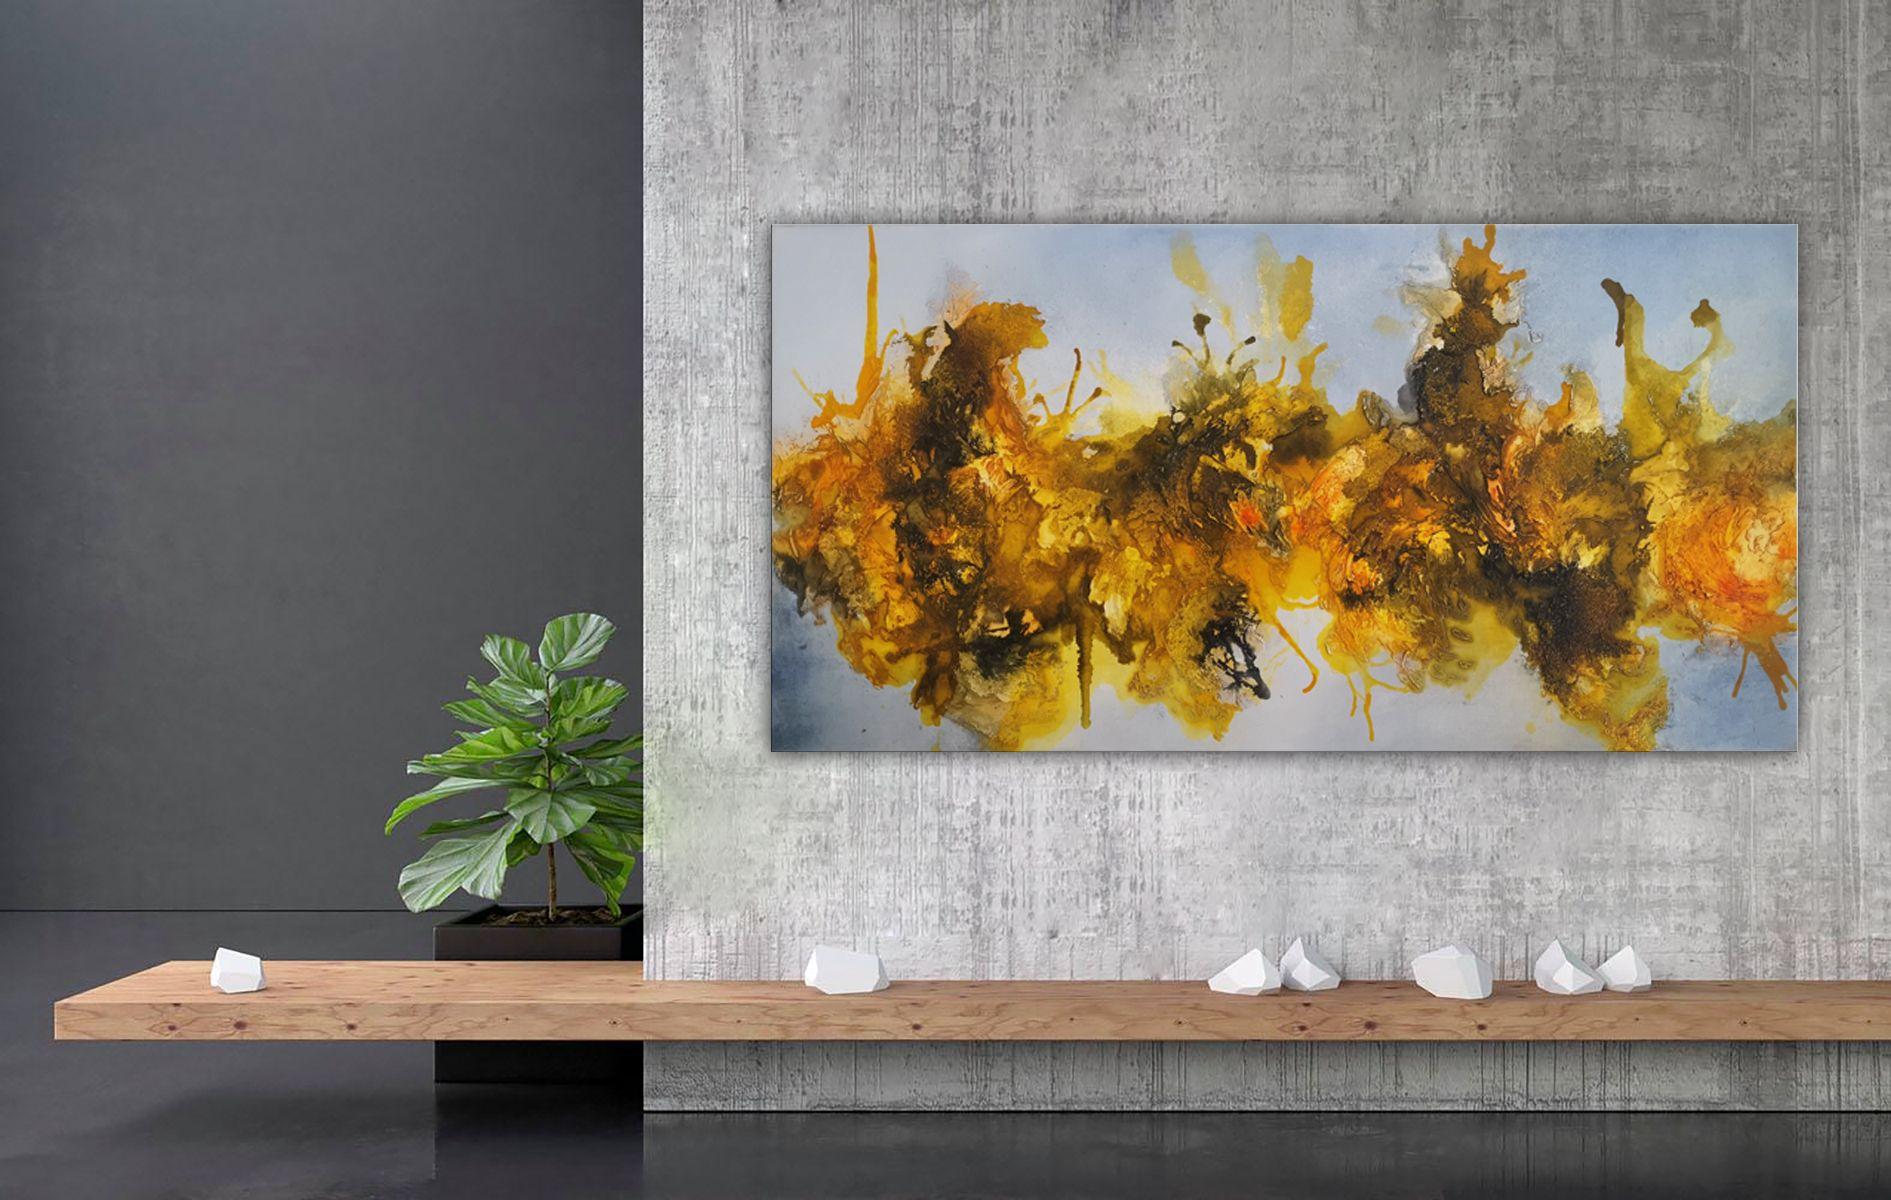 This abstract creation was in inspired by the Sulphur springs in Dallol, Ethiopia.  - Title: Alien planet  - Medium: Mixed media  - Support: canvas, ready to hang  - Size: 24